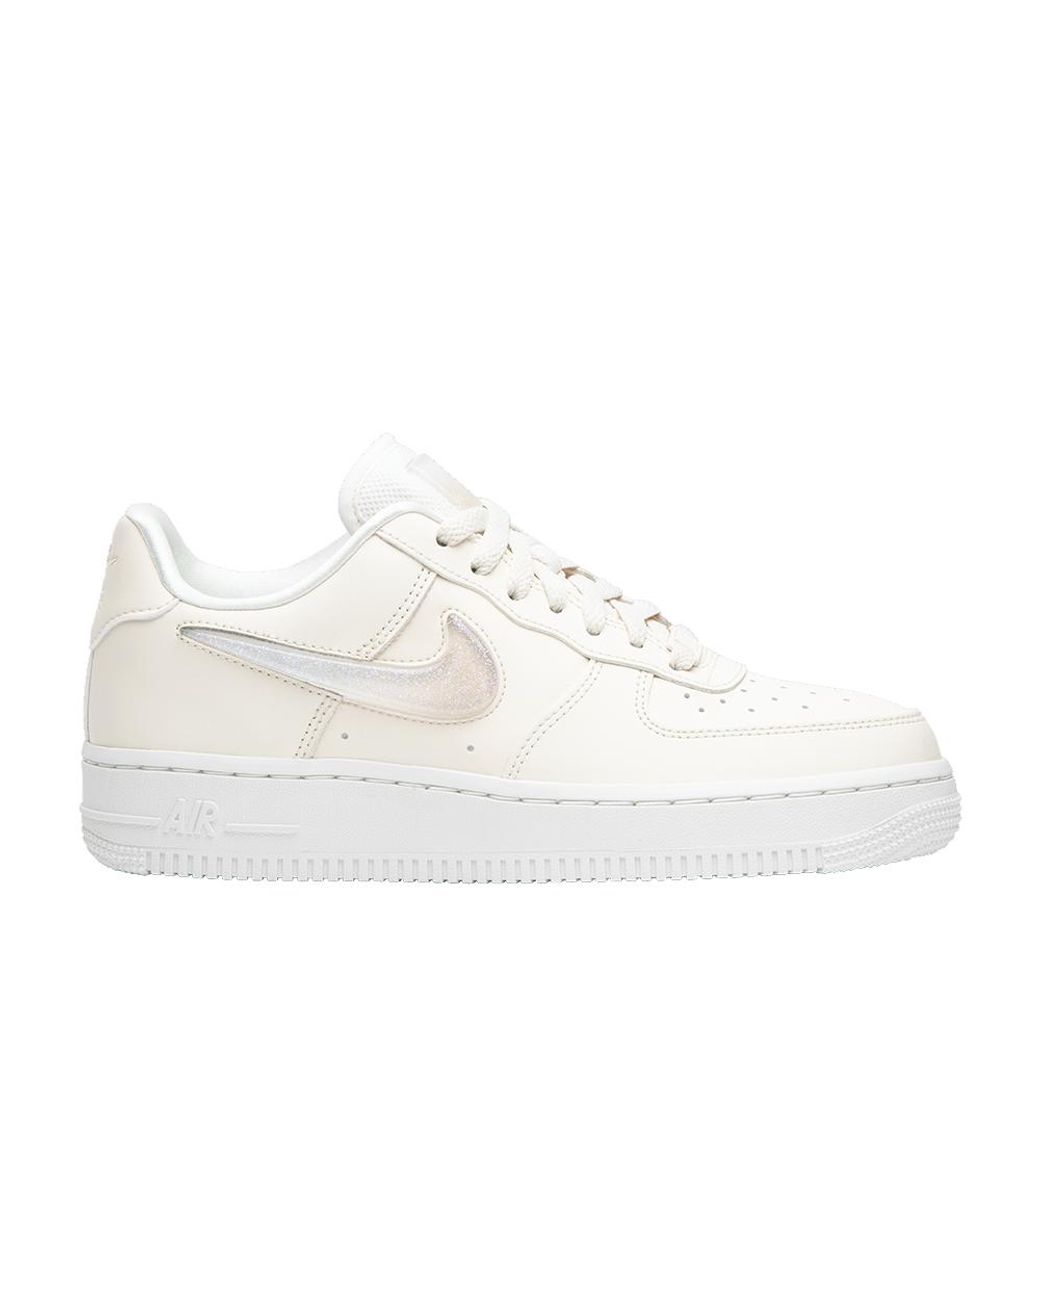 Nike Wmns Air Force 1 Low in Cream (White) - Lyst